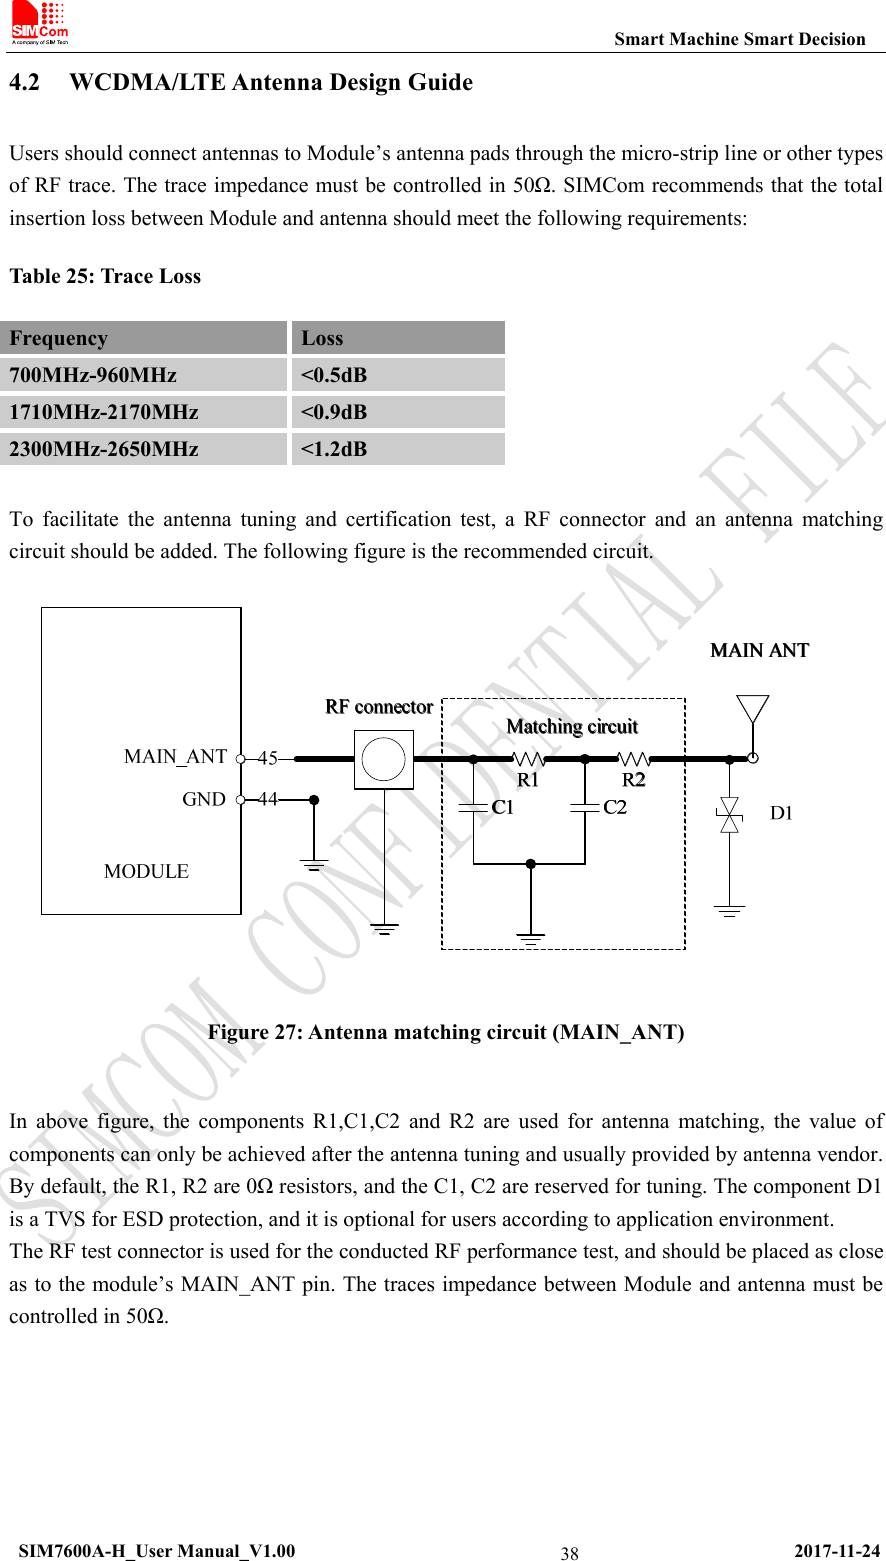                                                           Smart Machine Smart Decision  SIM7600A-H_User Manual_V1.00                                                     2017-11-24 384.2 WCDMA/LTE Antenna Design Guide Users should connect antennas to Module’s antenna pads through the micro-strip line or other types of RF trace. The trace impedance must be controlled in 50Ω. SIMCom recommends that the total insertion loss between Module and antenna should meet the following requirements: Table 25: Trace Loss Frequency  Loss 700MHz-960MHz  &lt;0.5dB 1710MHz-2170MHz  &lt;0.9dB 2300MHz-2650MHz  &lt;1.2dB  To facilitate the antenna tuning and certification test, a RF connector and an antenna matching circuit should be added. The following figure is the recommended circuit.    Figure 27: Antenna matching circuit (MAIN_ANT)  In above figure, the components R1,C1,C2 and R2 are used for antenna matching, the value of components can only be achieved after the antenna tuning and usually provided by antenna vendor.   By default, the R1, R2 are 0Ω resistors, and the C1, C2 are reserved for tuning. The component D1 is a TVS for ESD protection, and it is optional for users according to application environment. The RF test connector is used for the conducted RF performance test, and should be placed as close as to the module’s MAIN_ANT pin. The traces impedance between Module and antenna must be controlled in 50Ω.  